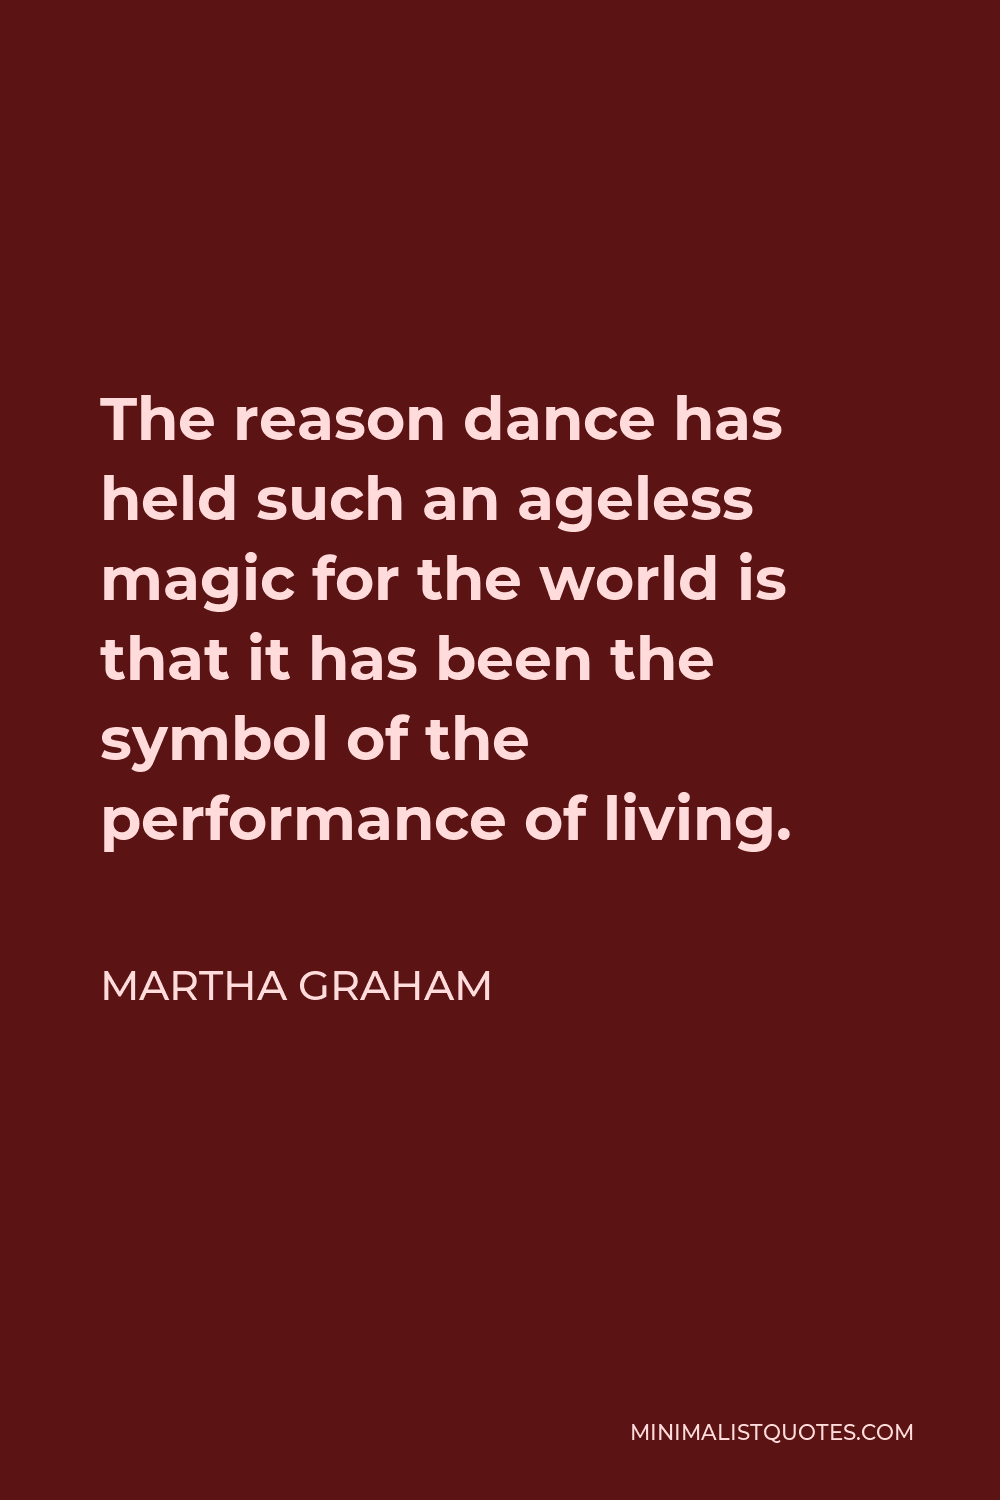 Martha Graham Quote - The reason dance has held such an ageless magic for the world is that it has been the symbol of the performance of living.